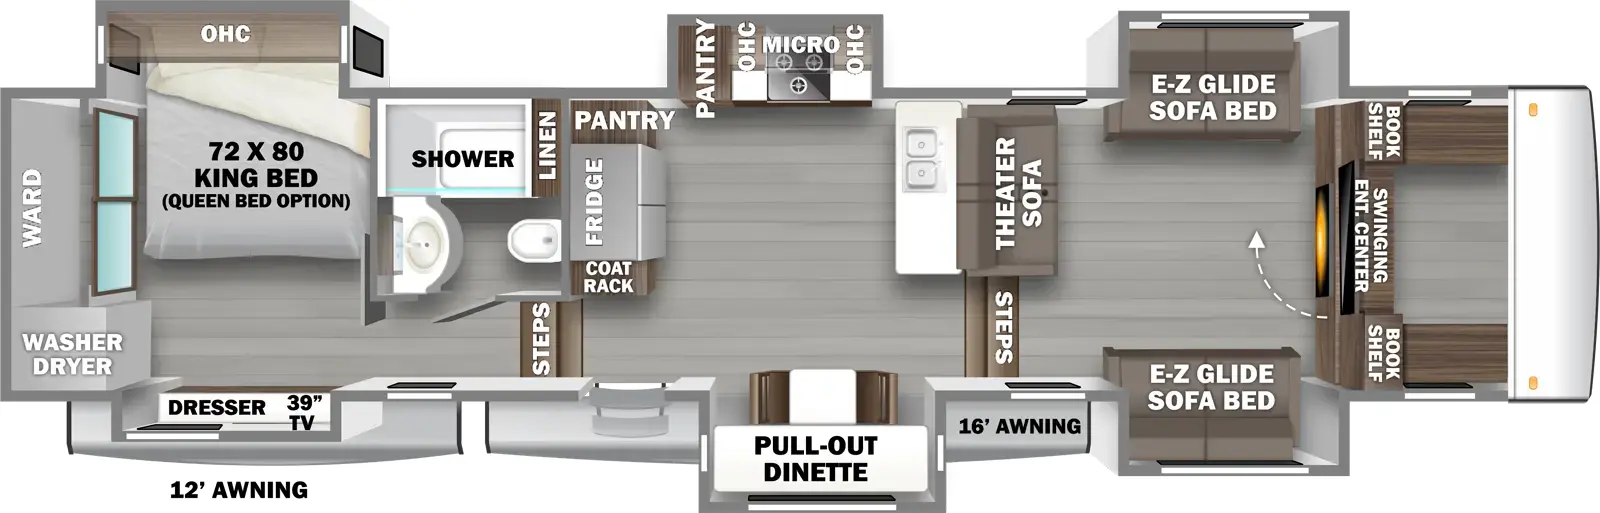 The 425FO has 6 slideouts and one entry. Exterior features a 12 foot awning and 16 foot awning. Interior layout front to back: swinging entertainment center with book shelves on each side, opposing e-z glide sofa bed slideouts, and theater sofa along inner wall; steps down to kitchen area; counter with sink along inner wall, off-door side slideout with cooktop, microwave, overhead cabinet and pantry, door side slideout with pull-out dinette, entry, and coat rack, refrigerator and pantry along inner wall; steps up to rear bedroom and bathroom; off-door side full bathroom with linen closet; rear bedroom with off-door side king bed (optional queen bed) slideout with overhead cabinet, door side slideout with dresser and TV, and rear wardrobe with washer and dryer.